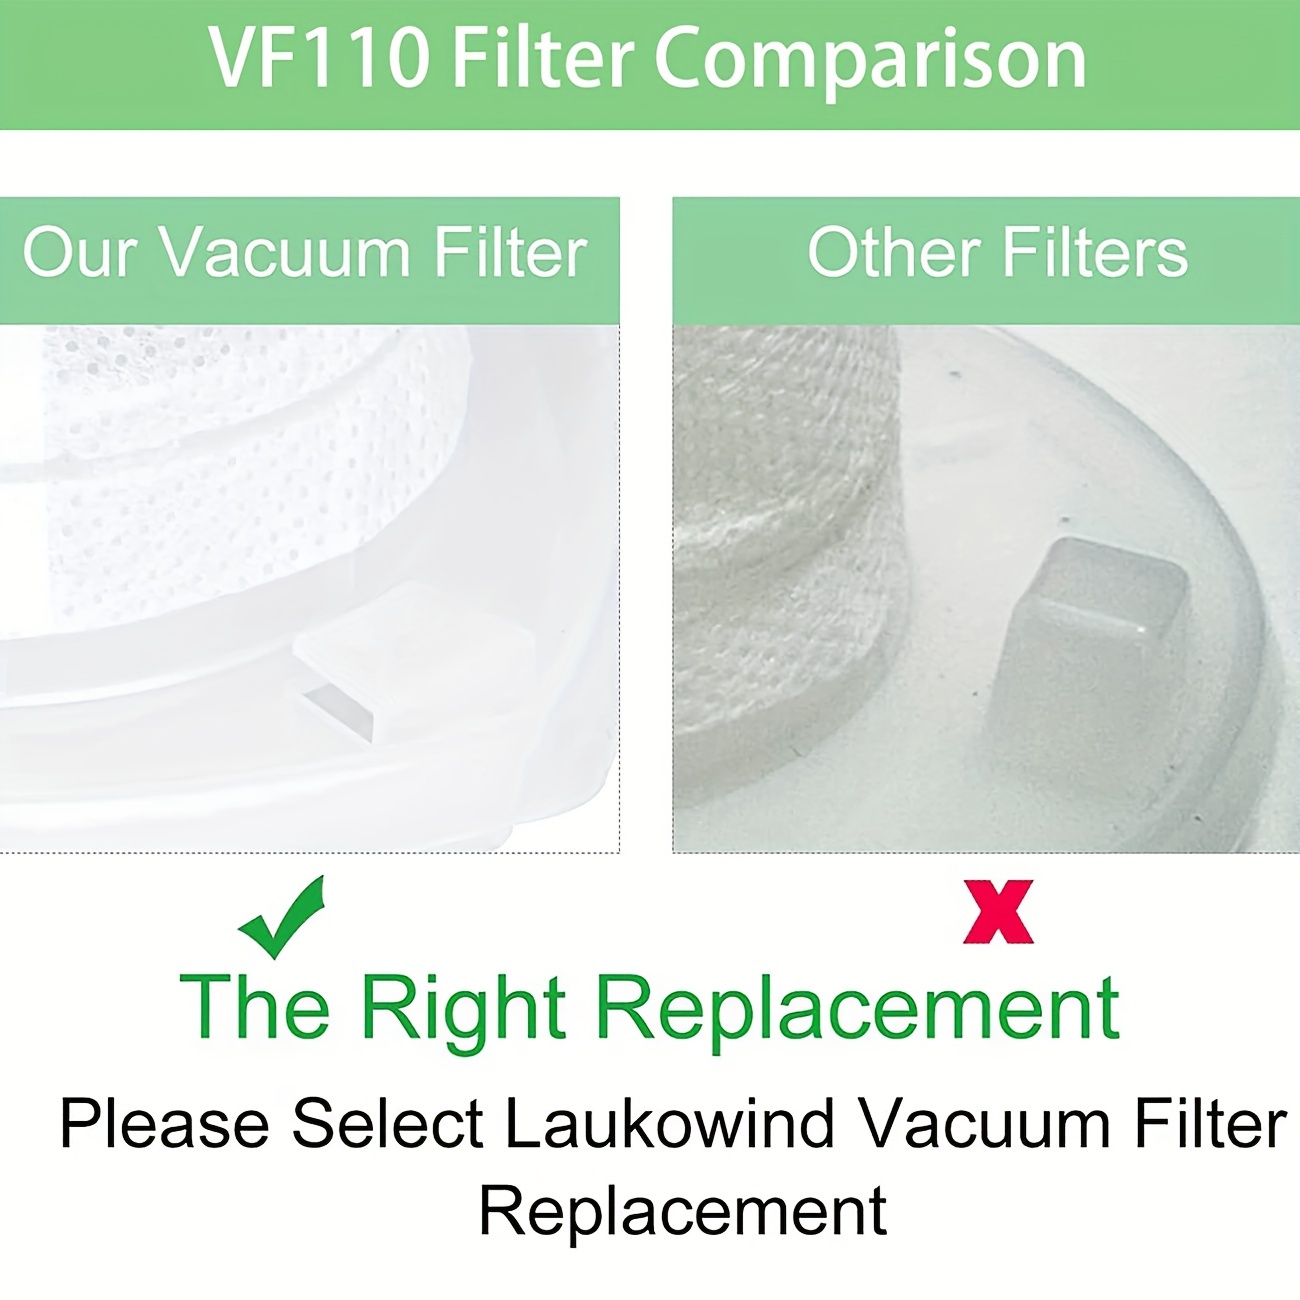 VF110 Filters for 90558113-01 Black and Decker Vacuum CHV1410